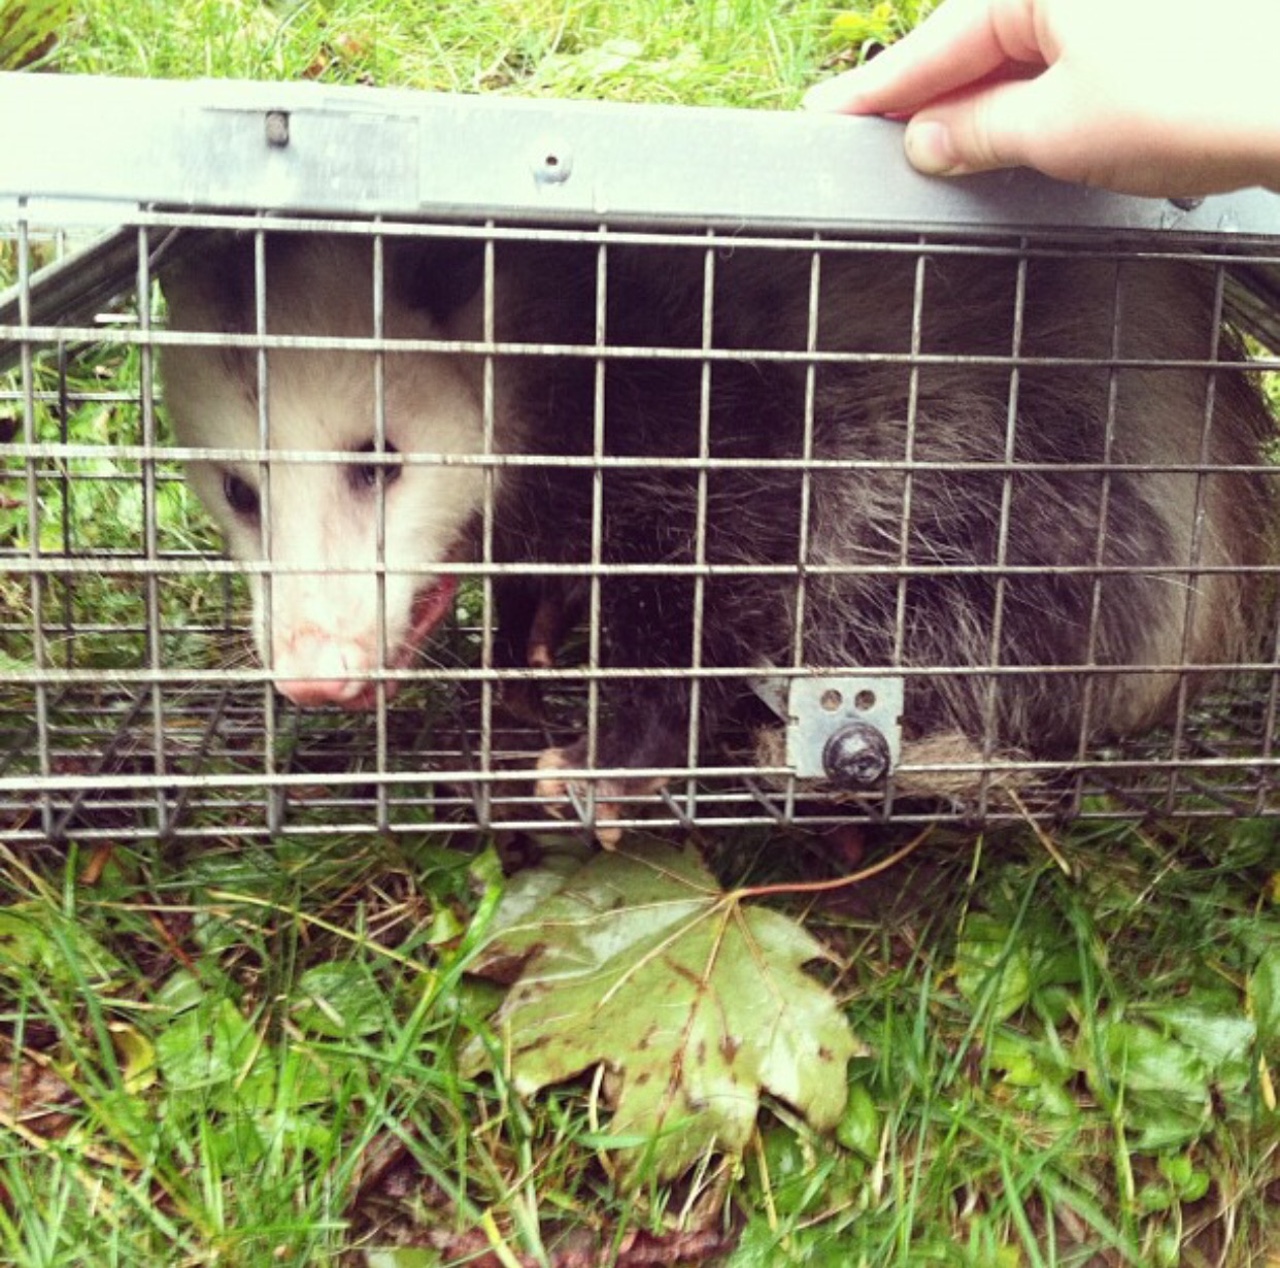 Opossum Removal and Opossum Control Professionals How To Remove A Possum From Your Garage